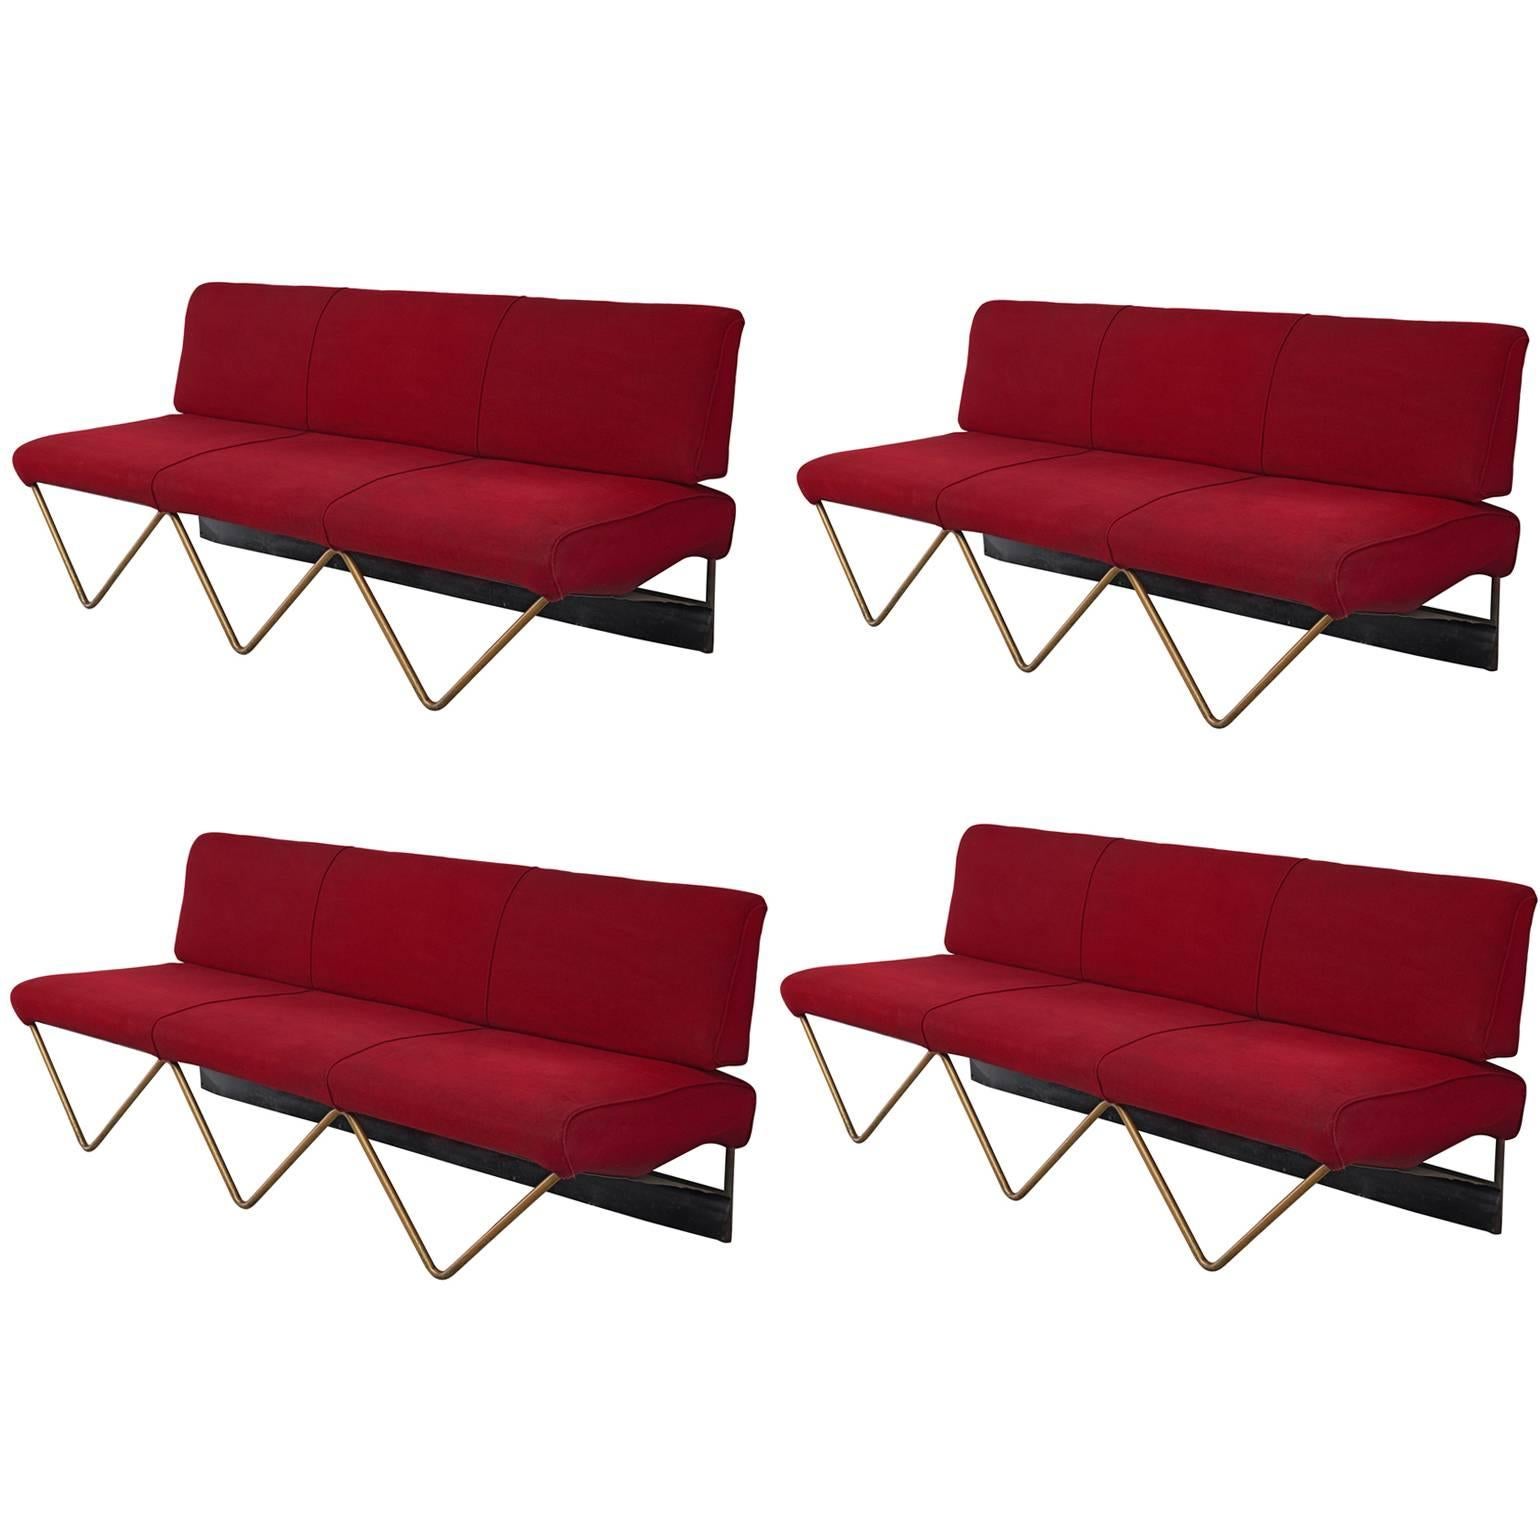 Sofa, fabric and metal, Italy, 1970s.

This playful sofa and daybed has a base formed out of three triangles. Above the triangles are three seating and back sections. Both slender and strong, this sofa is typical for post-war Italian design.

We